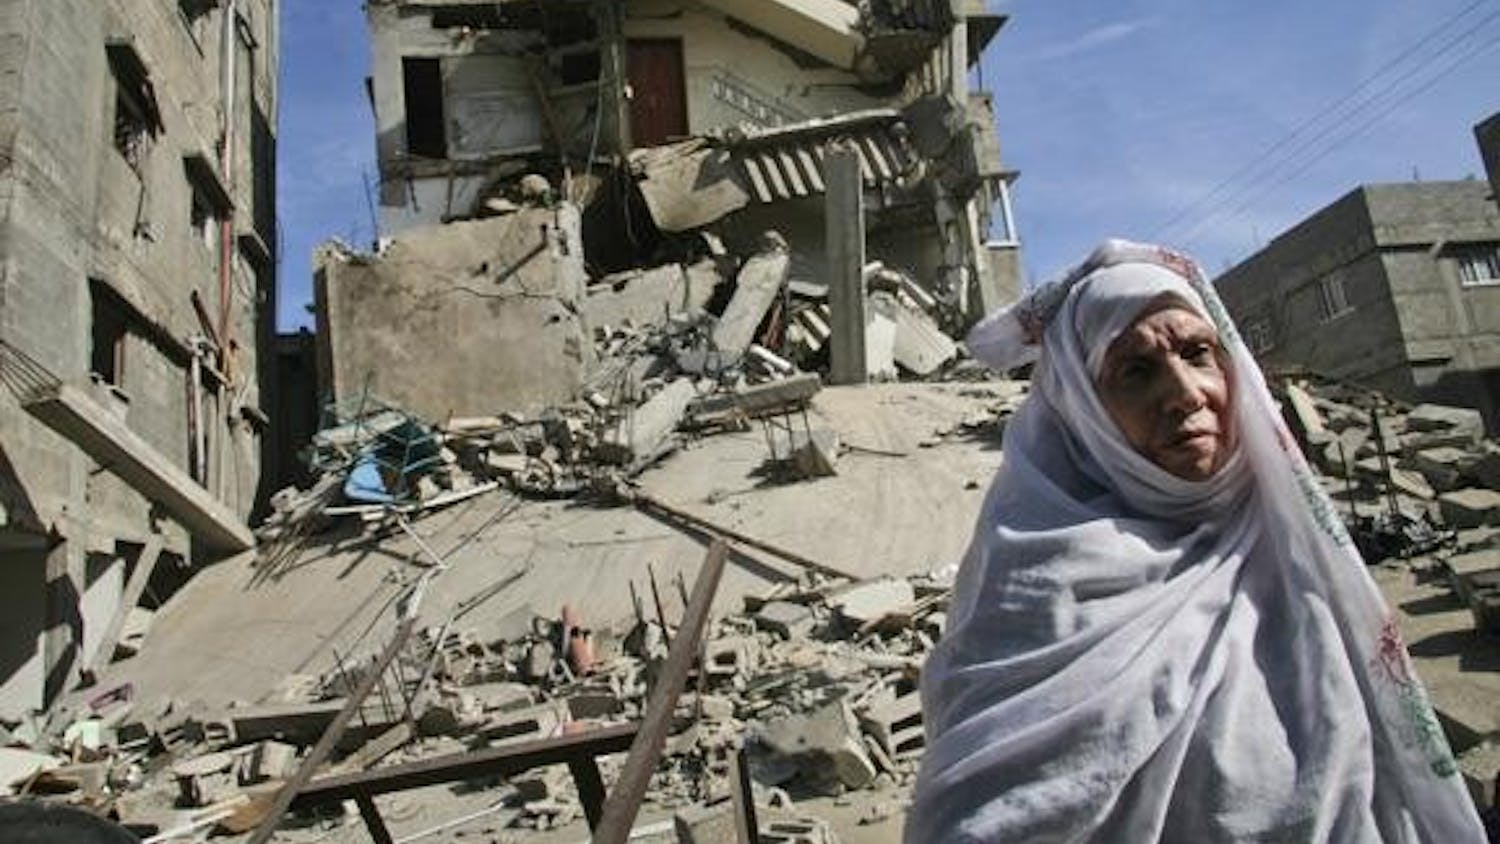 A Palestinian woman stands on the rubble of a destroyed building after an Israeli airstrike Wednesday in Gaza City. Two and a half weeks of Israel's fierce assaults on Gaza's Hamas rulers have destroyed at least $1.4 billion worth of buildings, water pipes, roads, power lines and other assets, independent Palestinian surveyors say. 